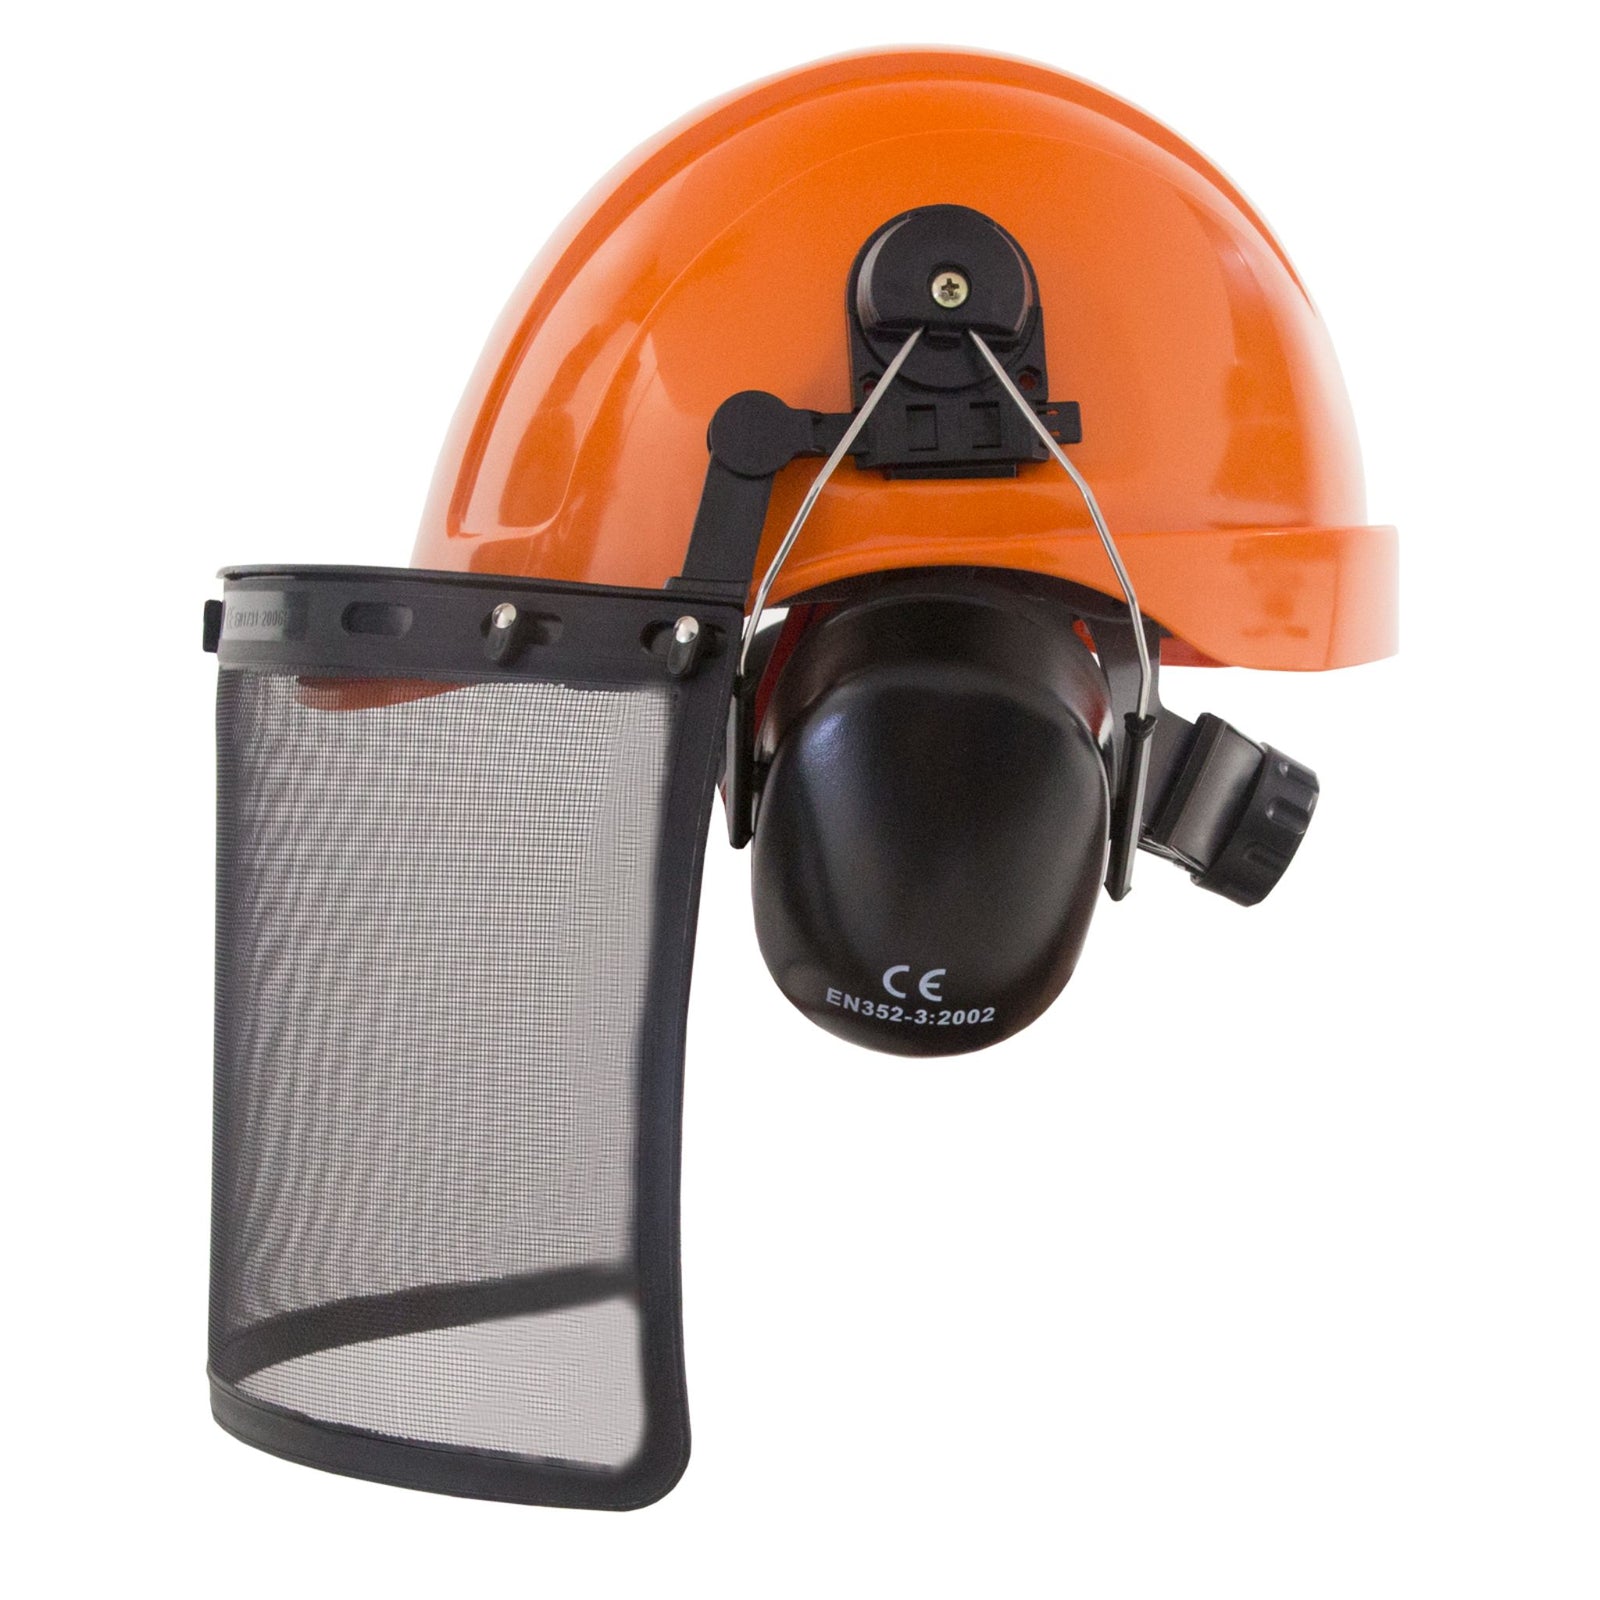 Orange safety cap style hard hat kit with iron mesh face shield and earmuffs for hearing protection